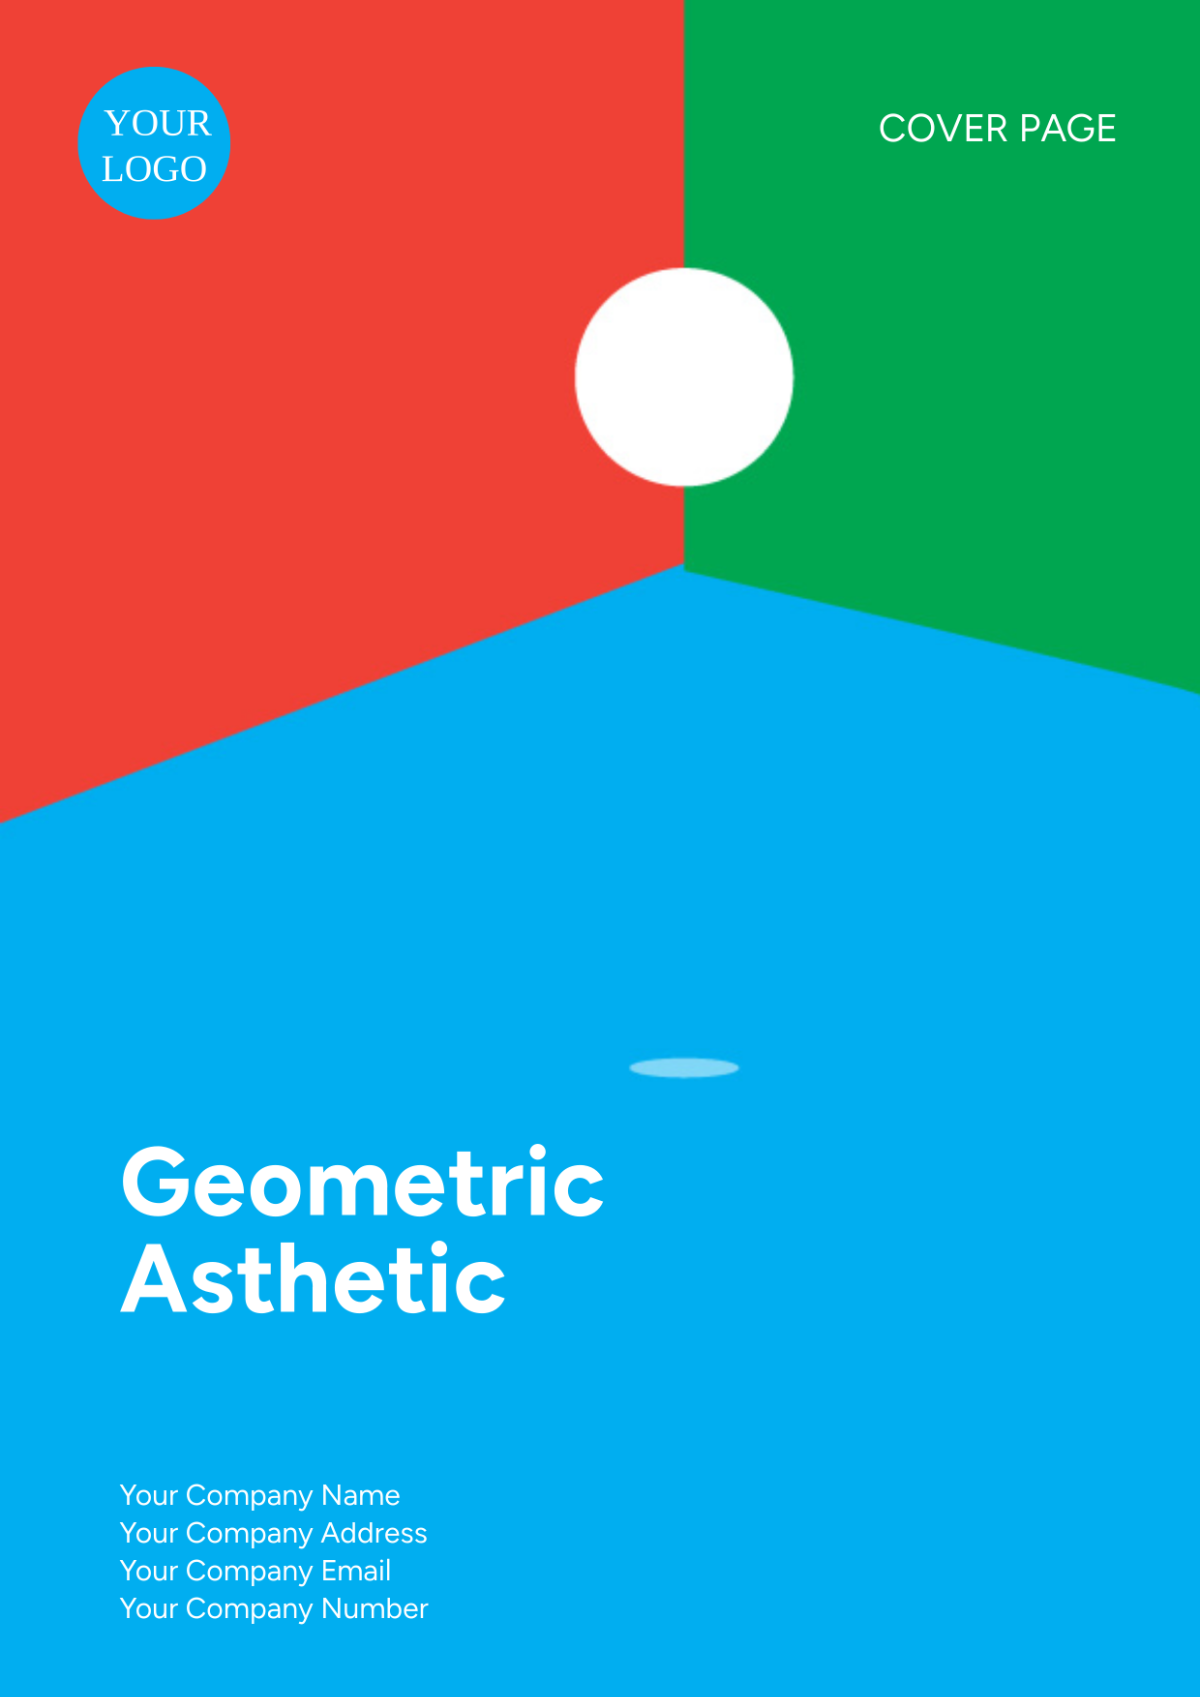 Geometric Abstract Aesthetic Cover Page